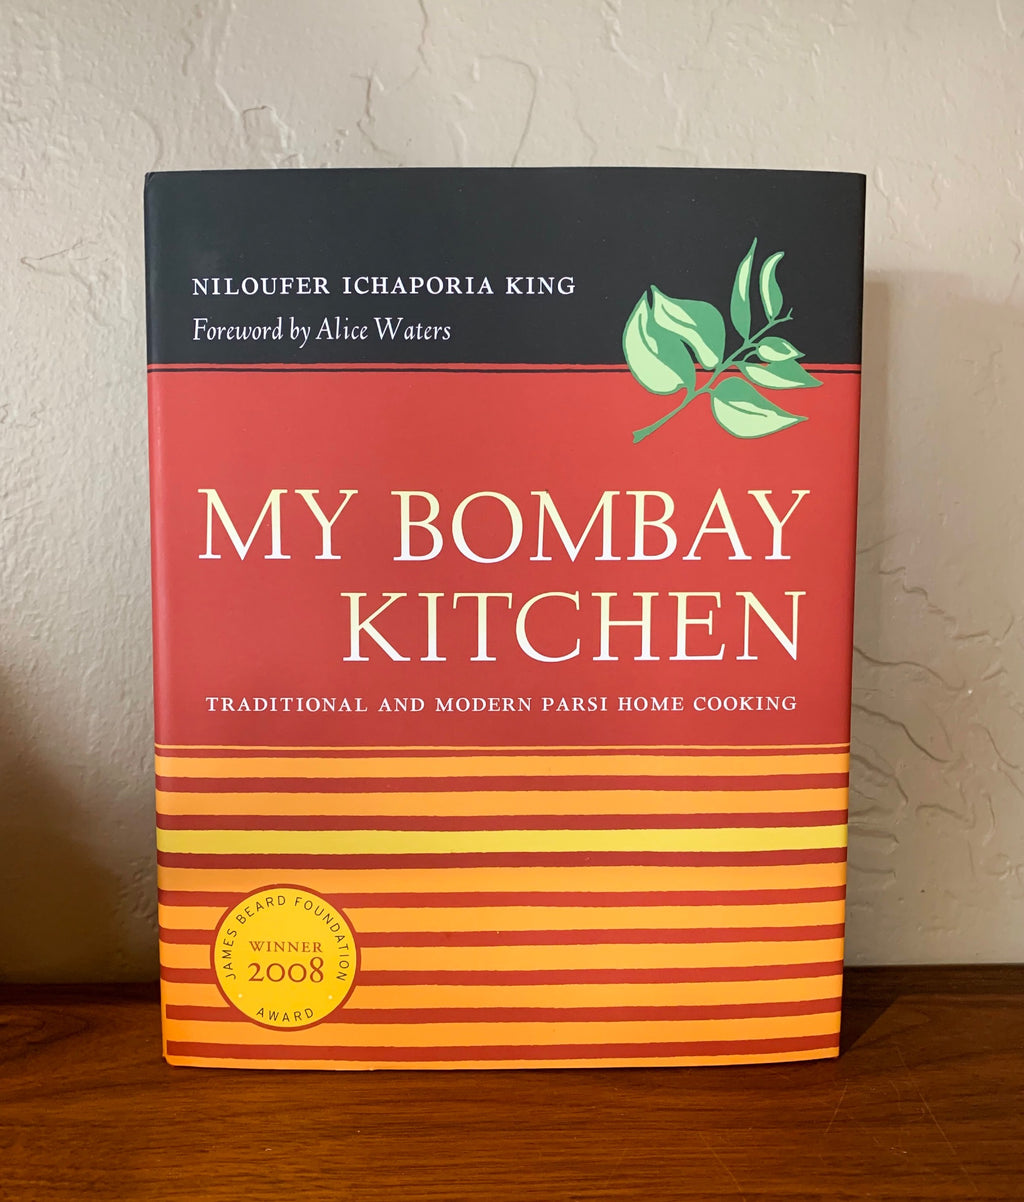 My Bombay Kitchen by Niloufer Ichaporia King, front cover. Hardcover.  ISBN-10: 0520249607  ISBN-13: 978-0520249608